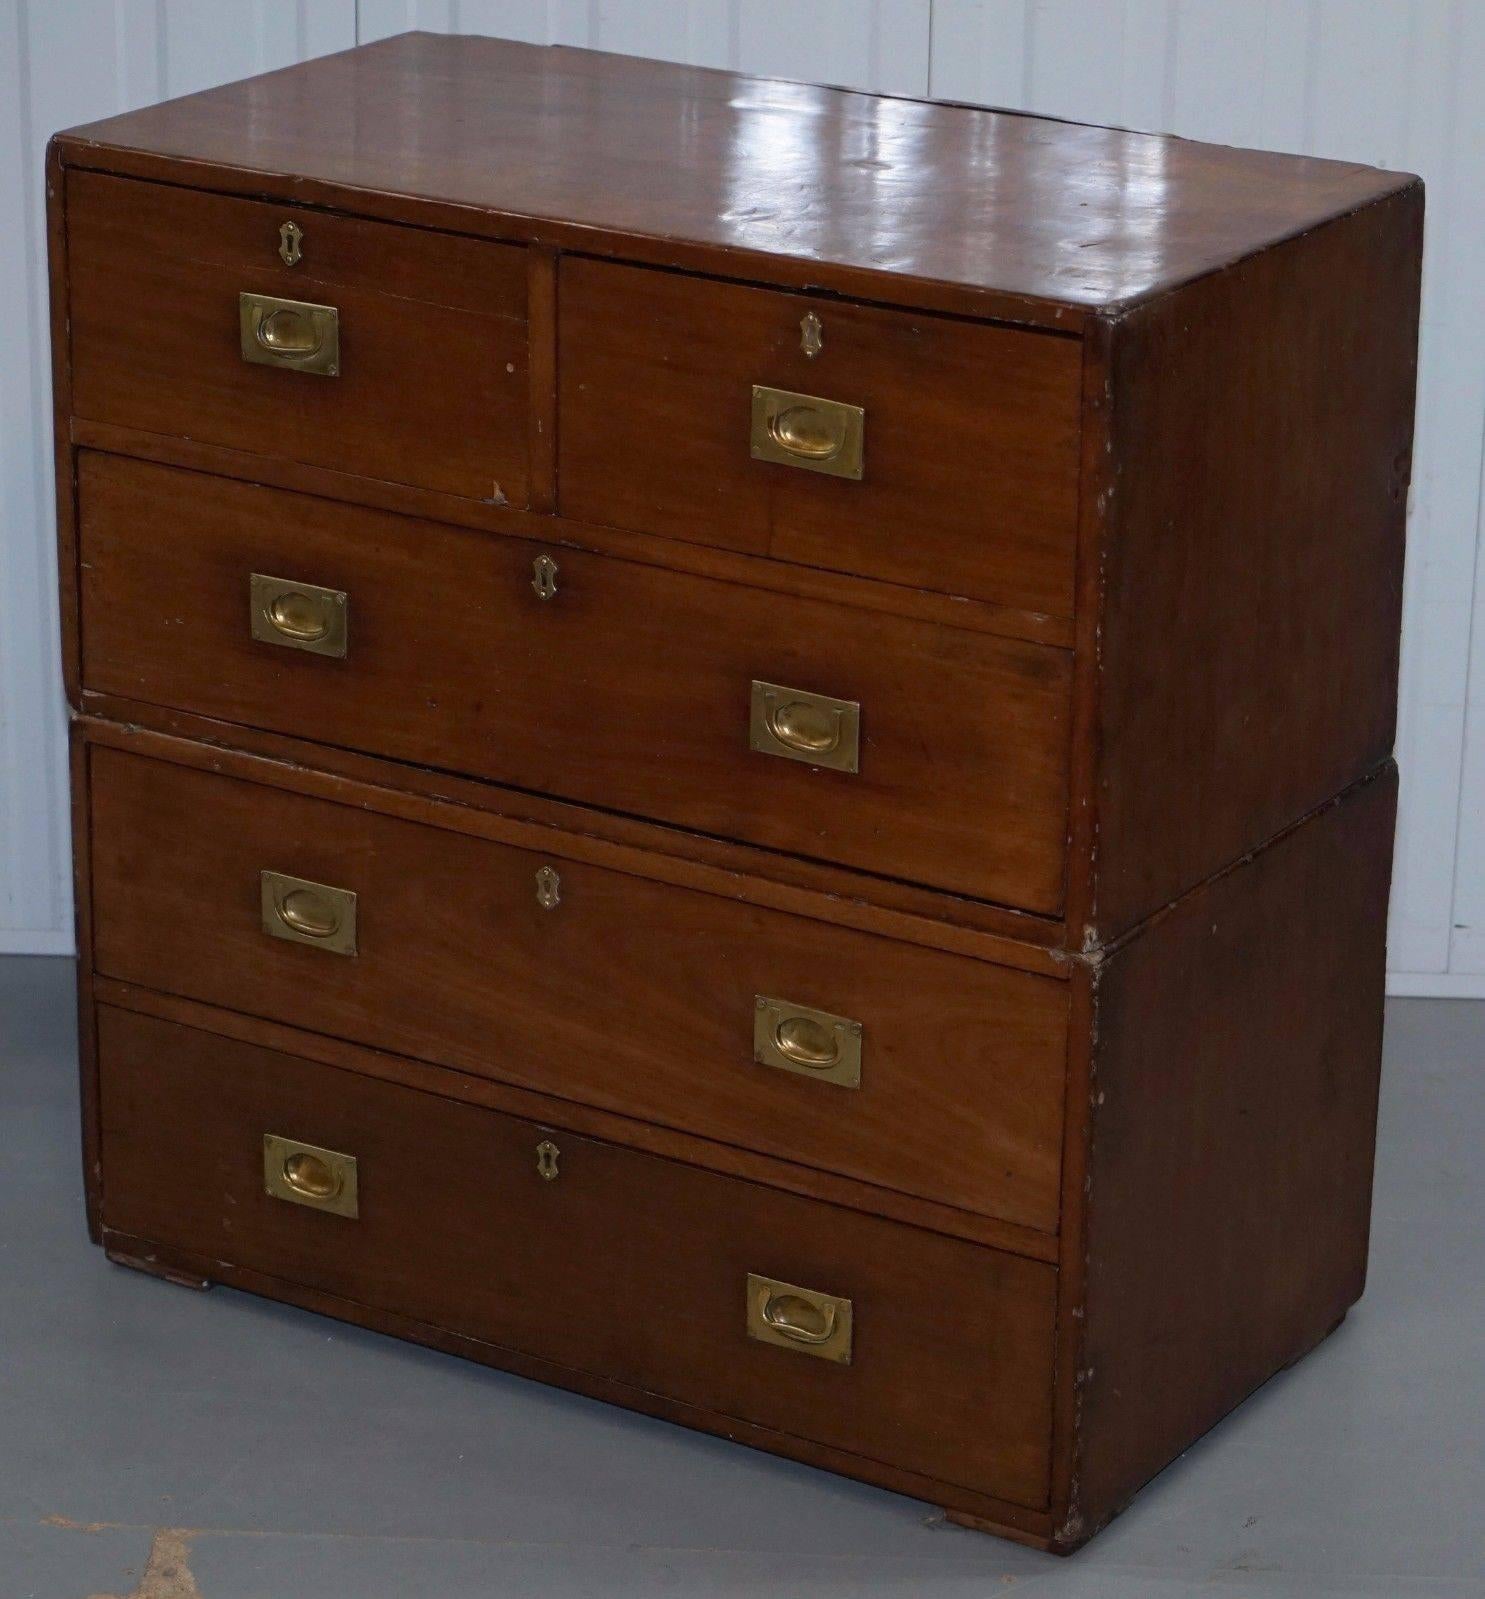 British Stunning Victorian Mahogany Antique Military Campaign Chest of Drawers Patina!